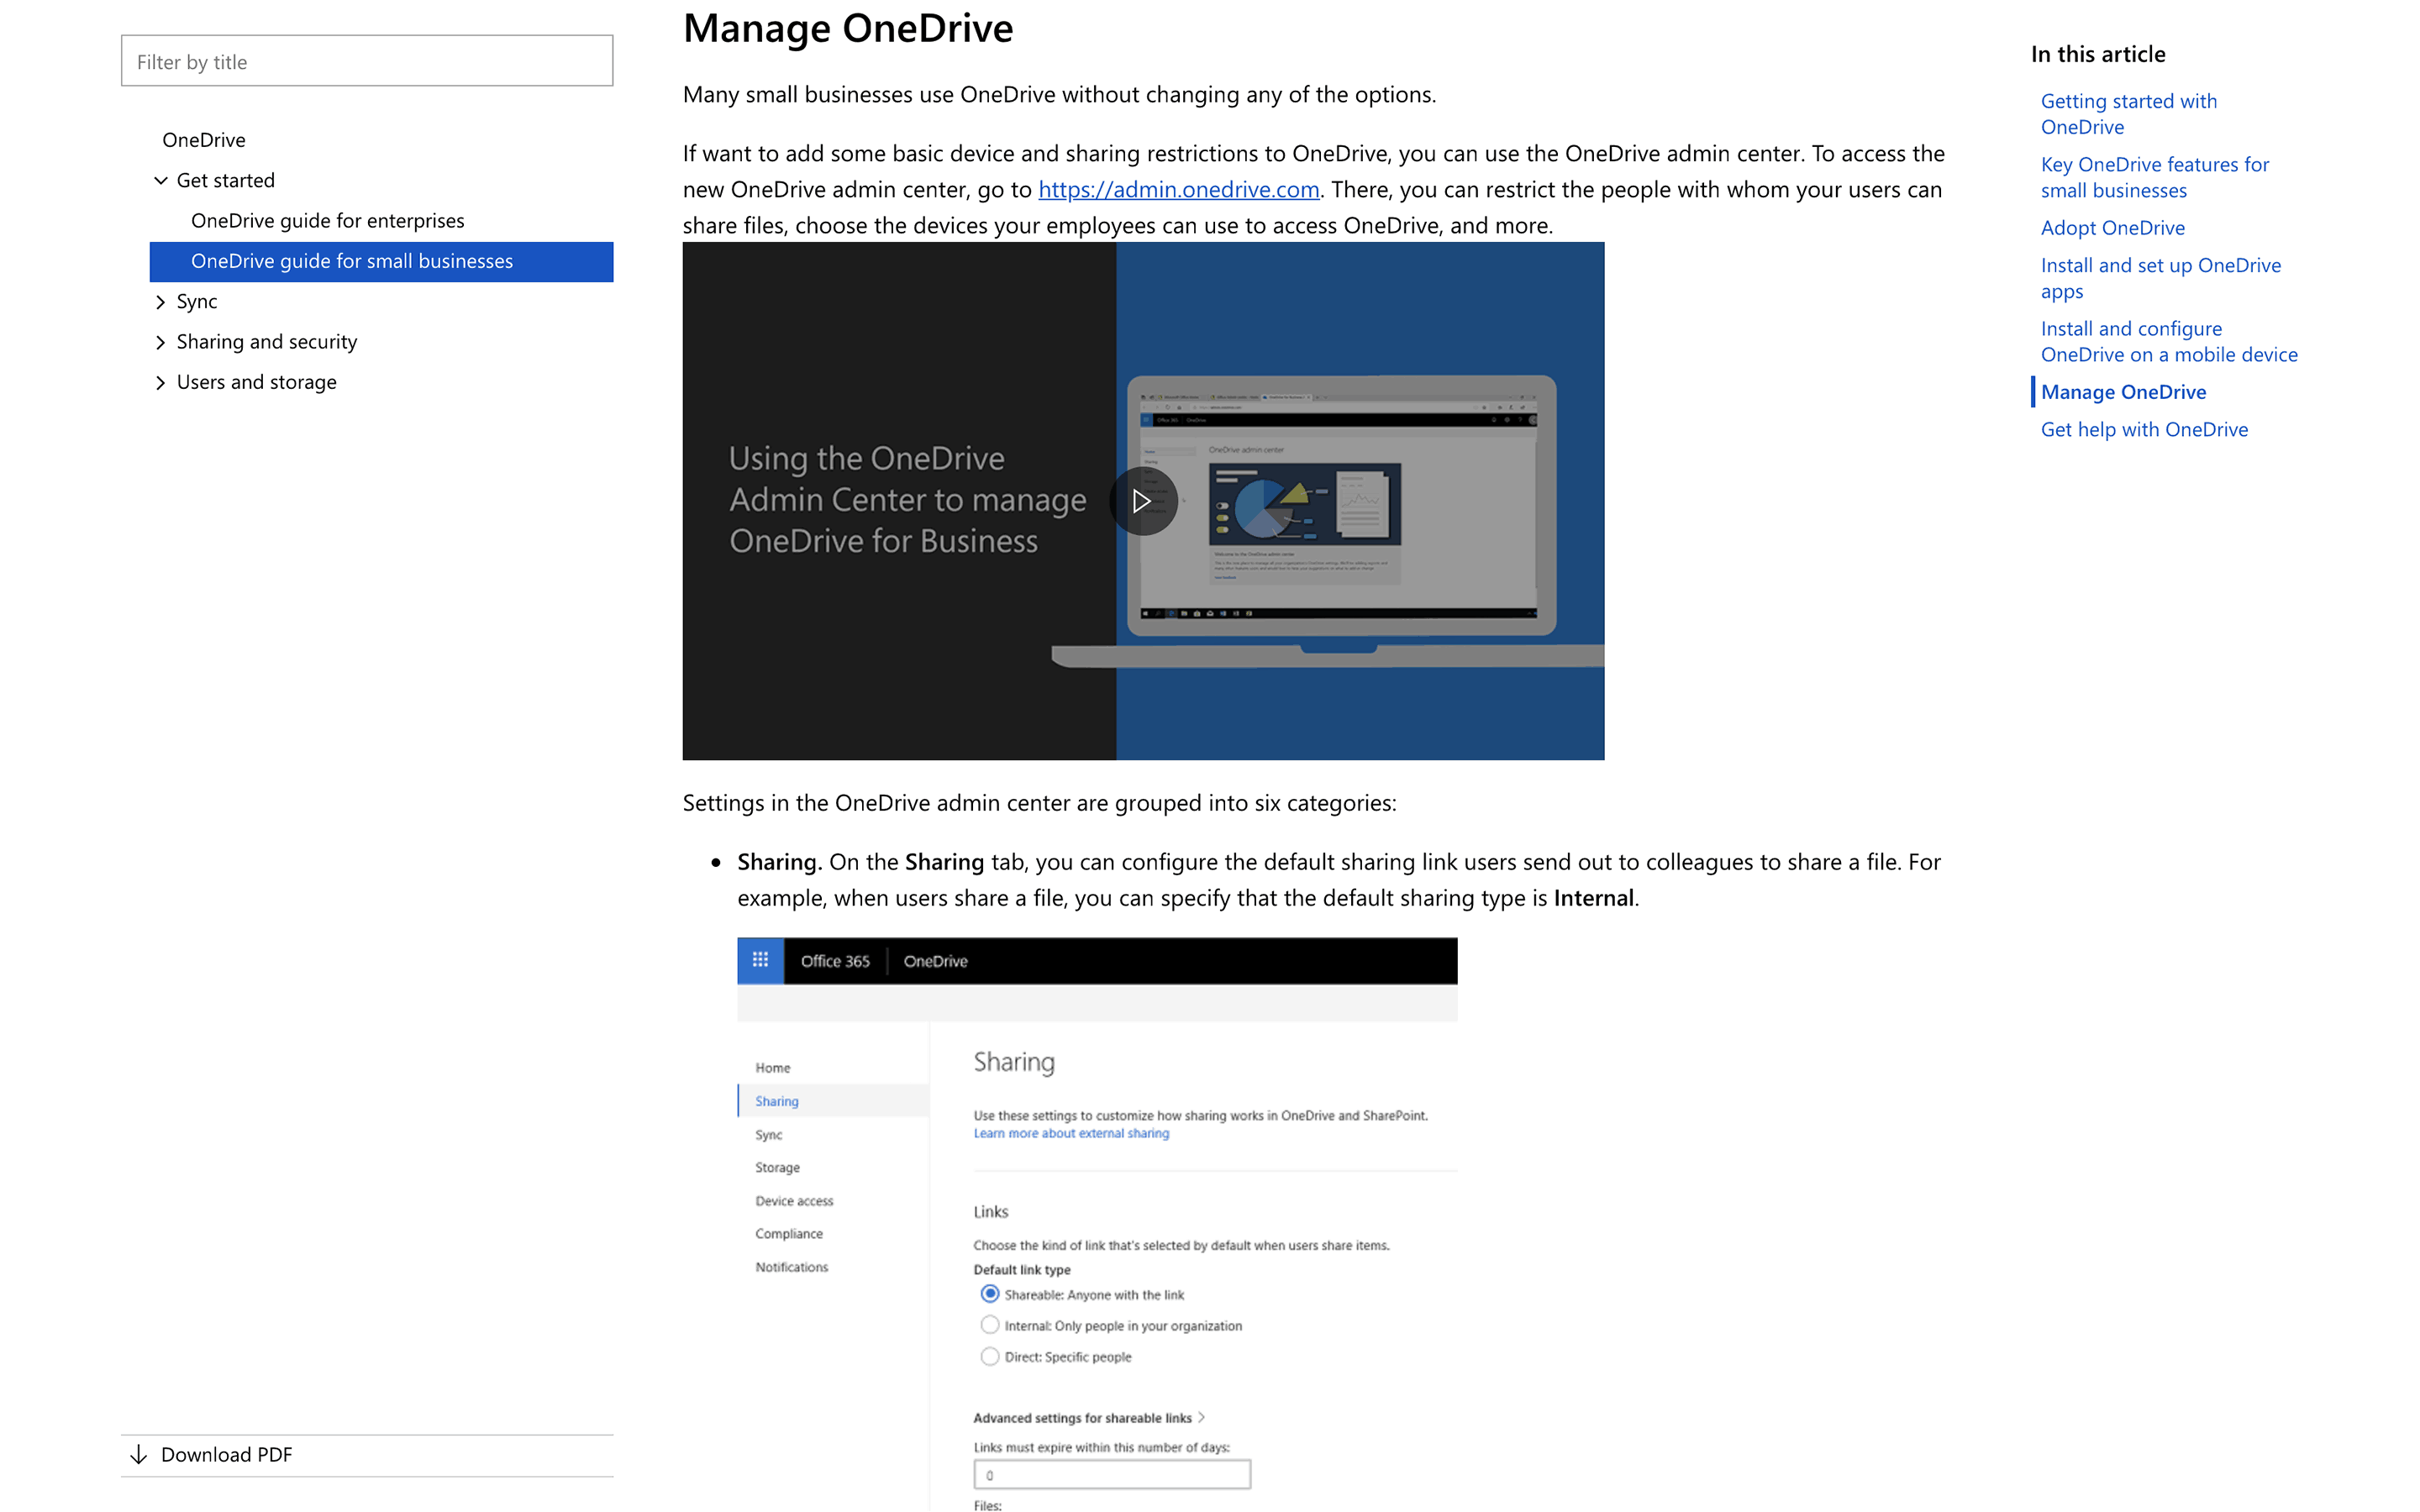 Screenshot of the “Manage OneDrive” section